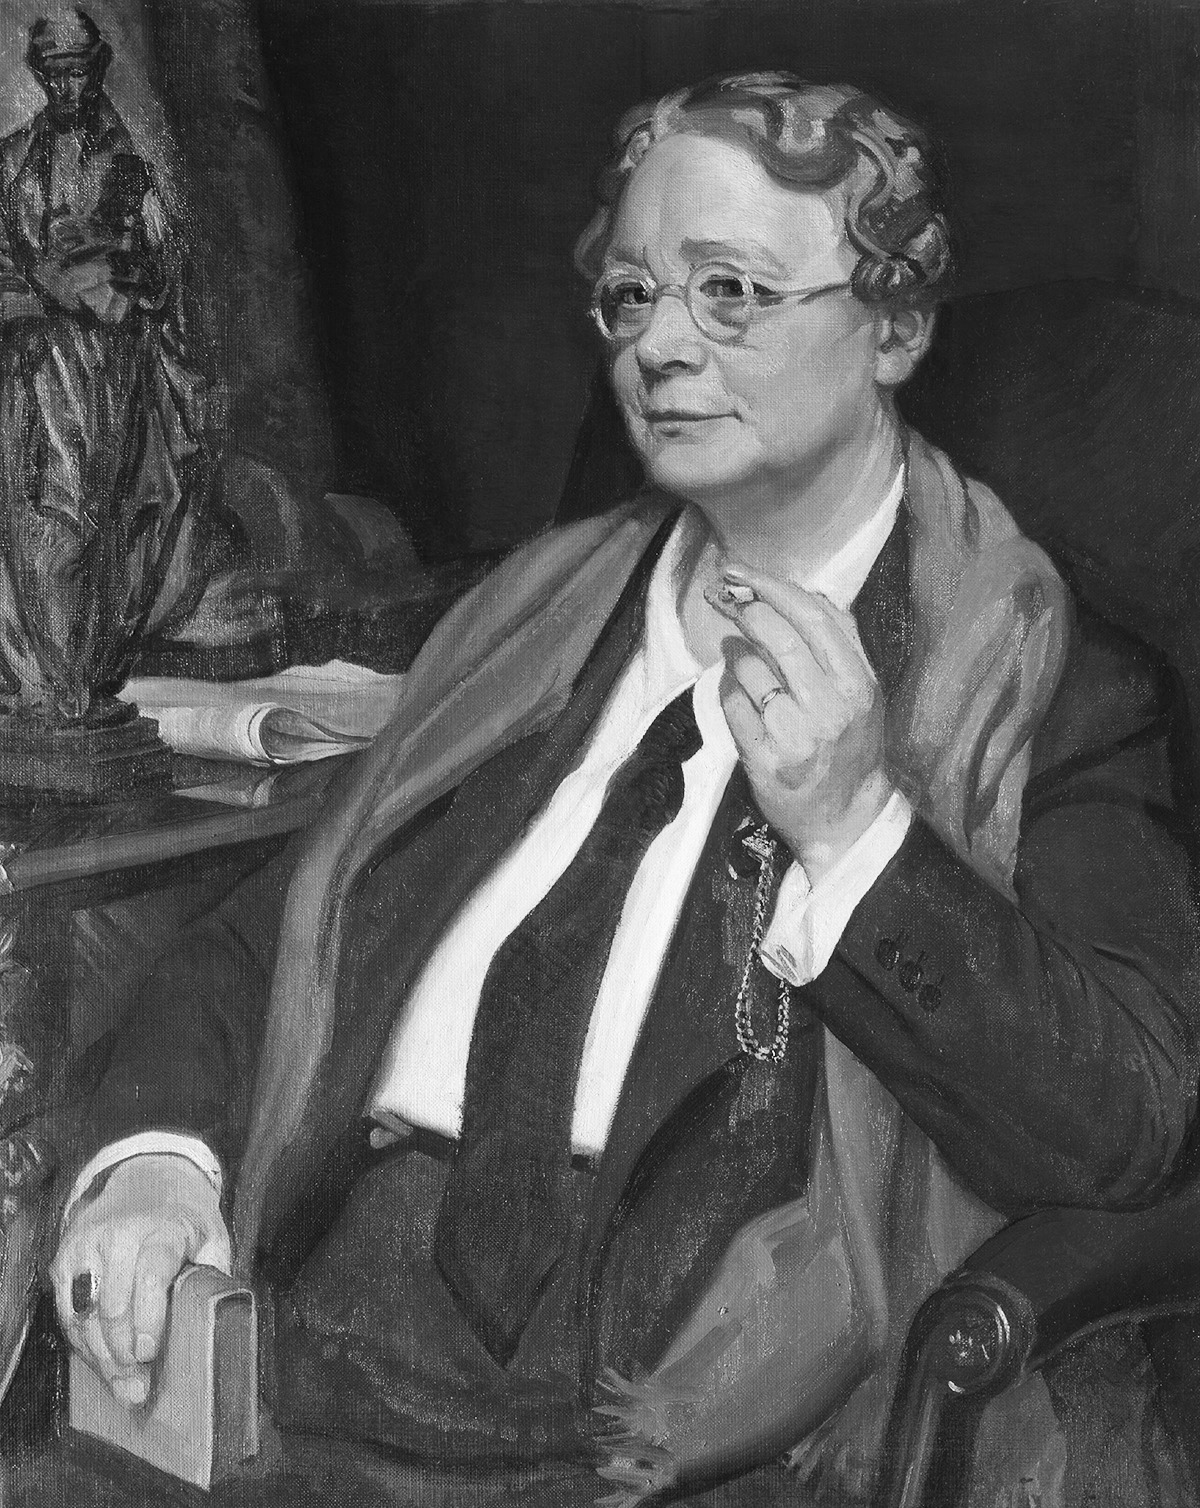 Are women human dorothy sayers